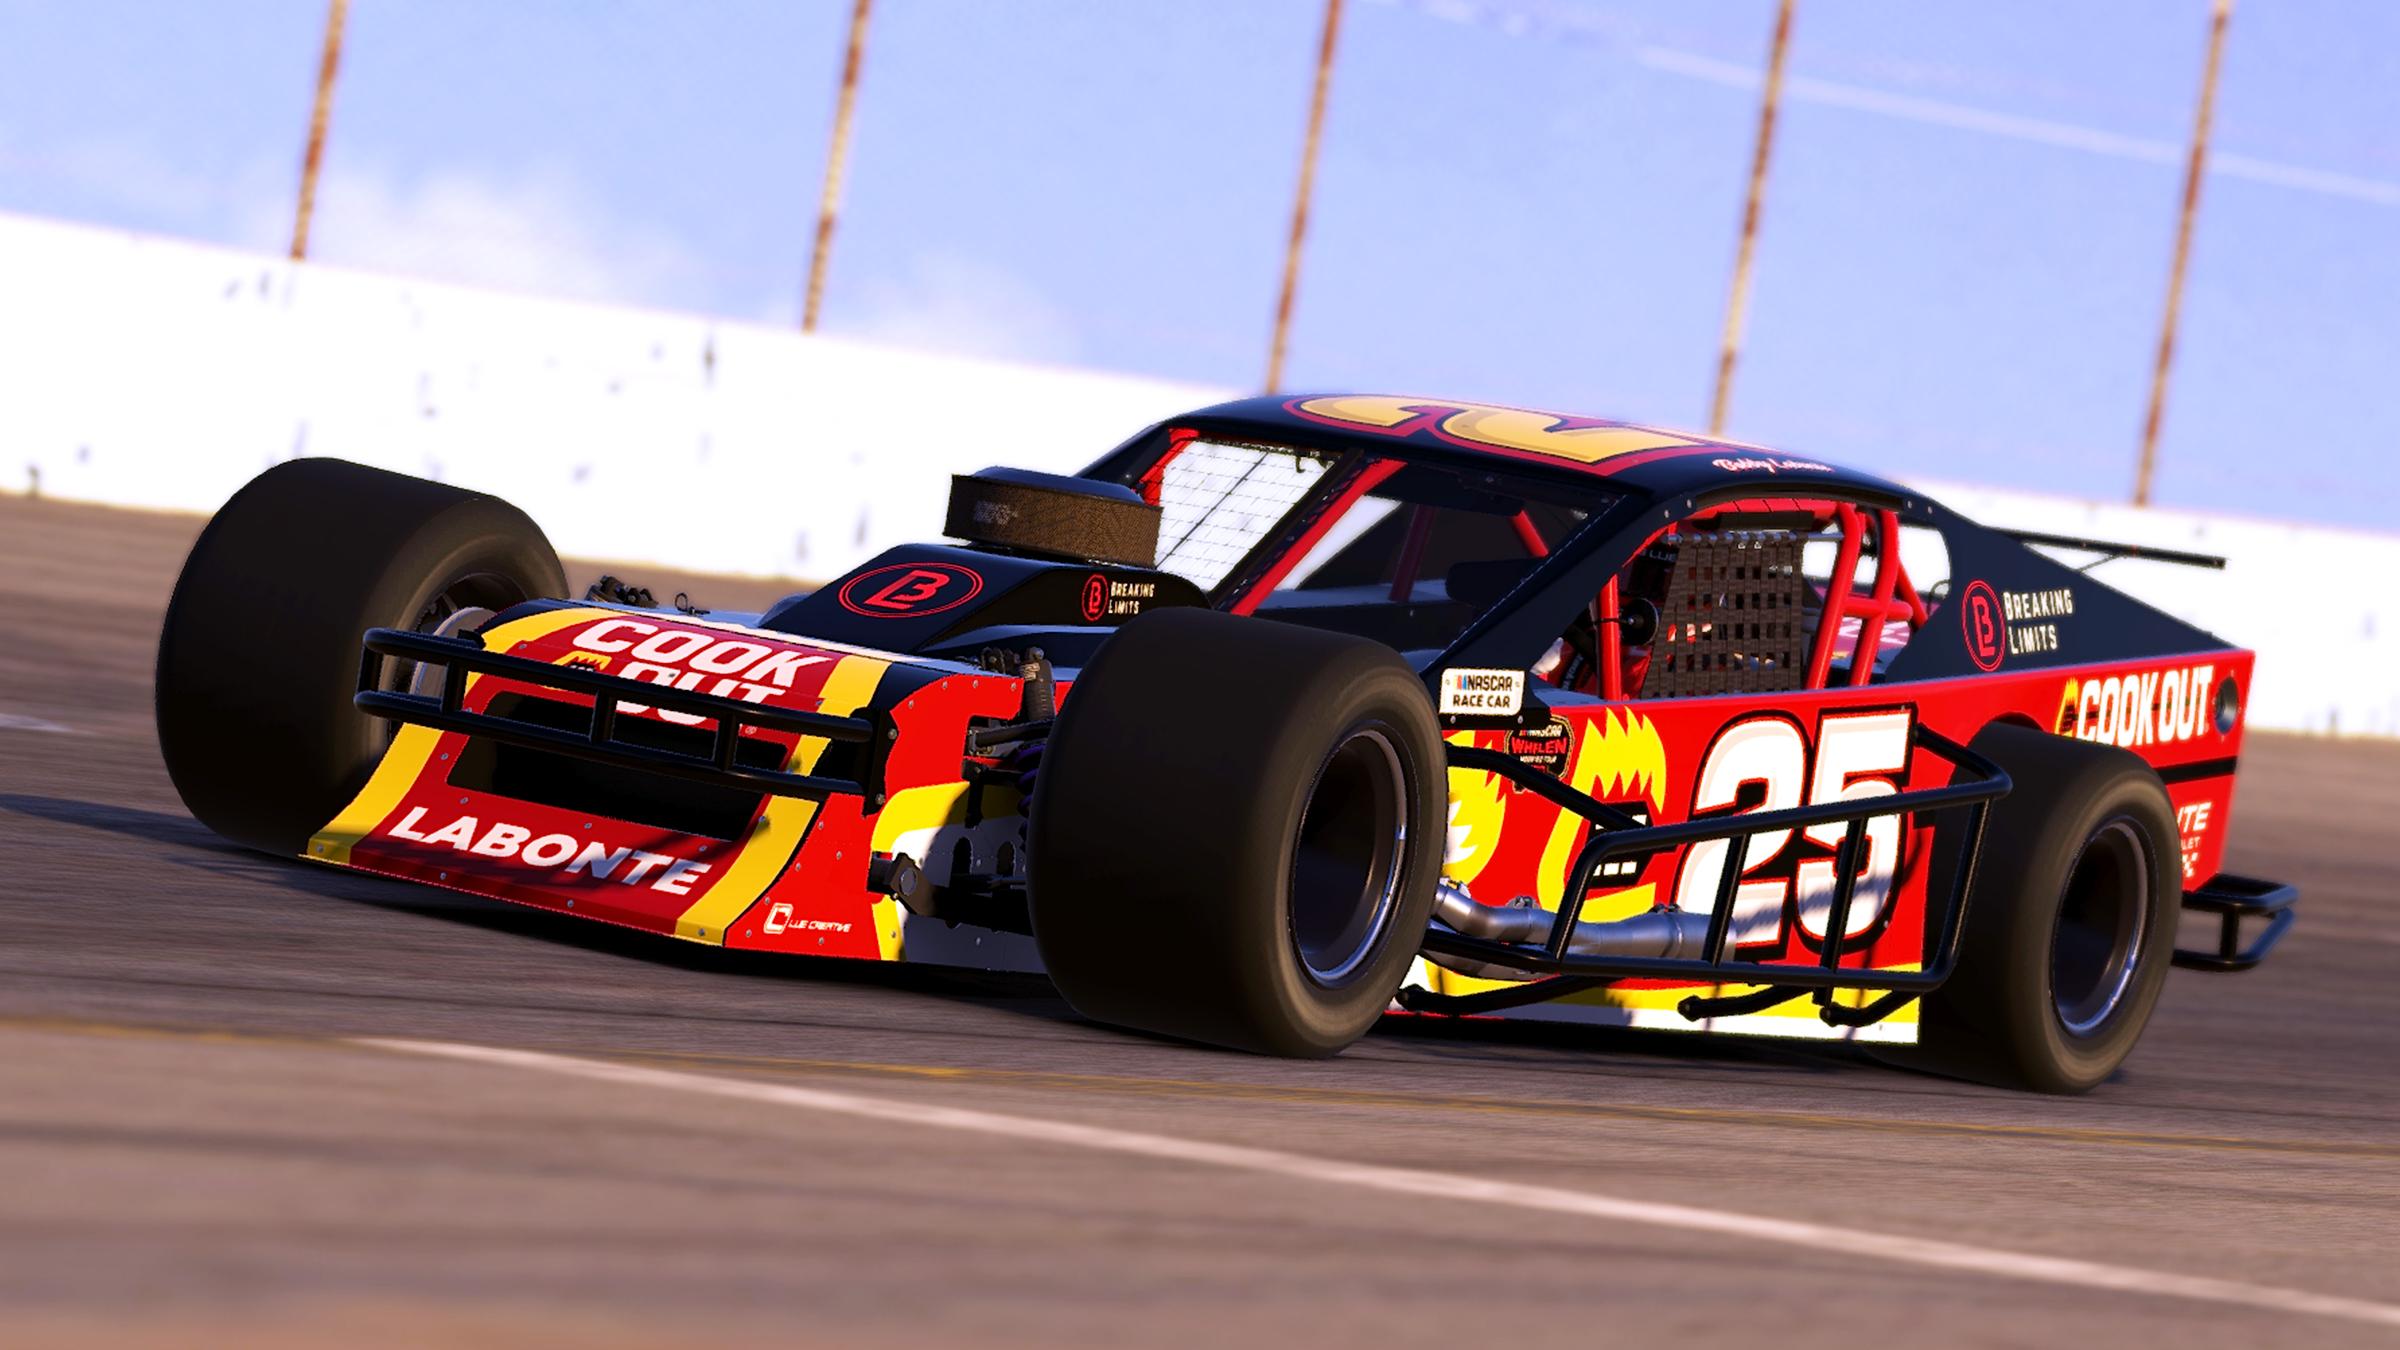 Preview of Bobby Labonte #25 Cook Out Racing Modified by Harris Lue